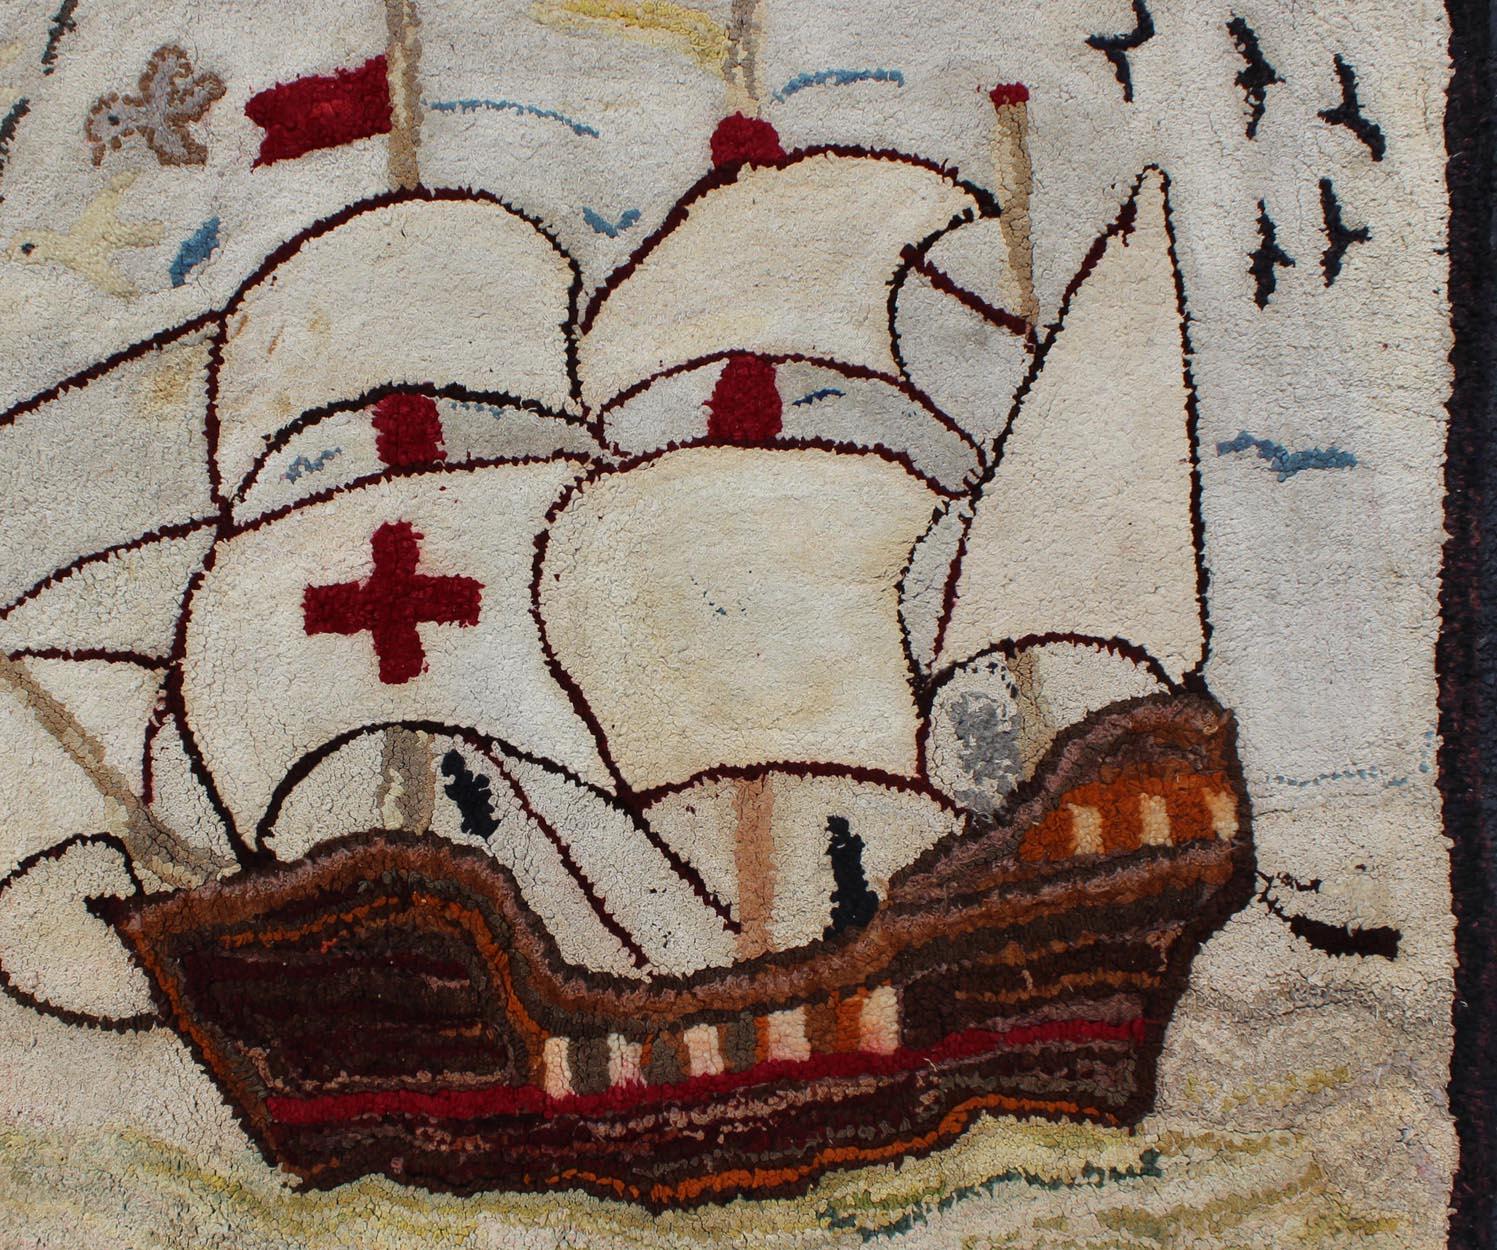 Antique American hooked rug with boat at the sea, birds with knights templar. Keivan Woven Arts/ rug/ J10-1201, country of origin / type: United States / Hooked, circa 1920

Measures: 2'4 x 2'11 

This colorful American hooked rug depicts a